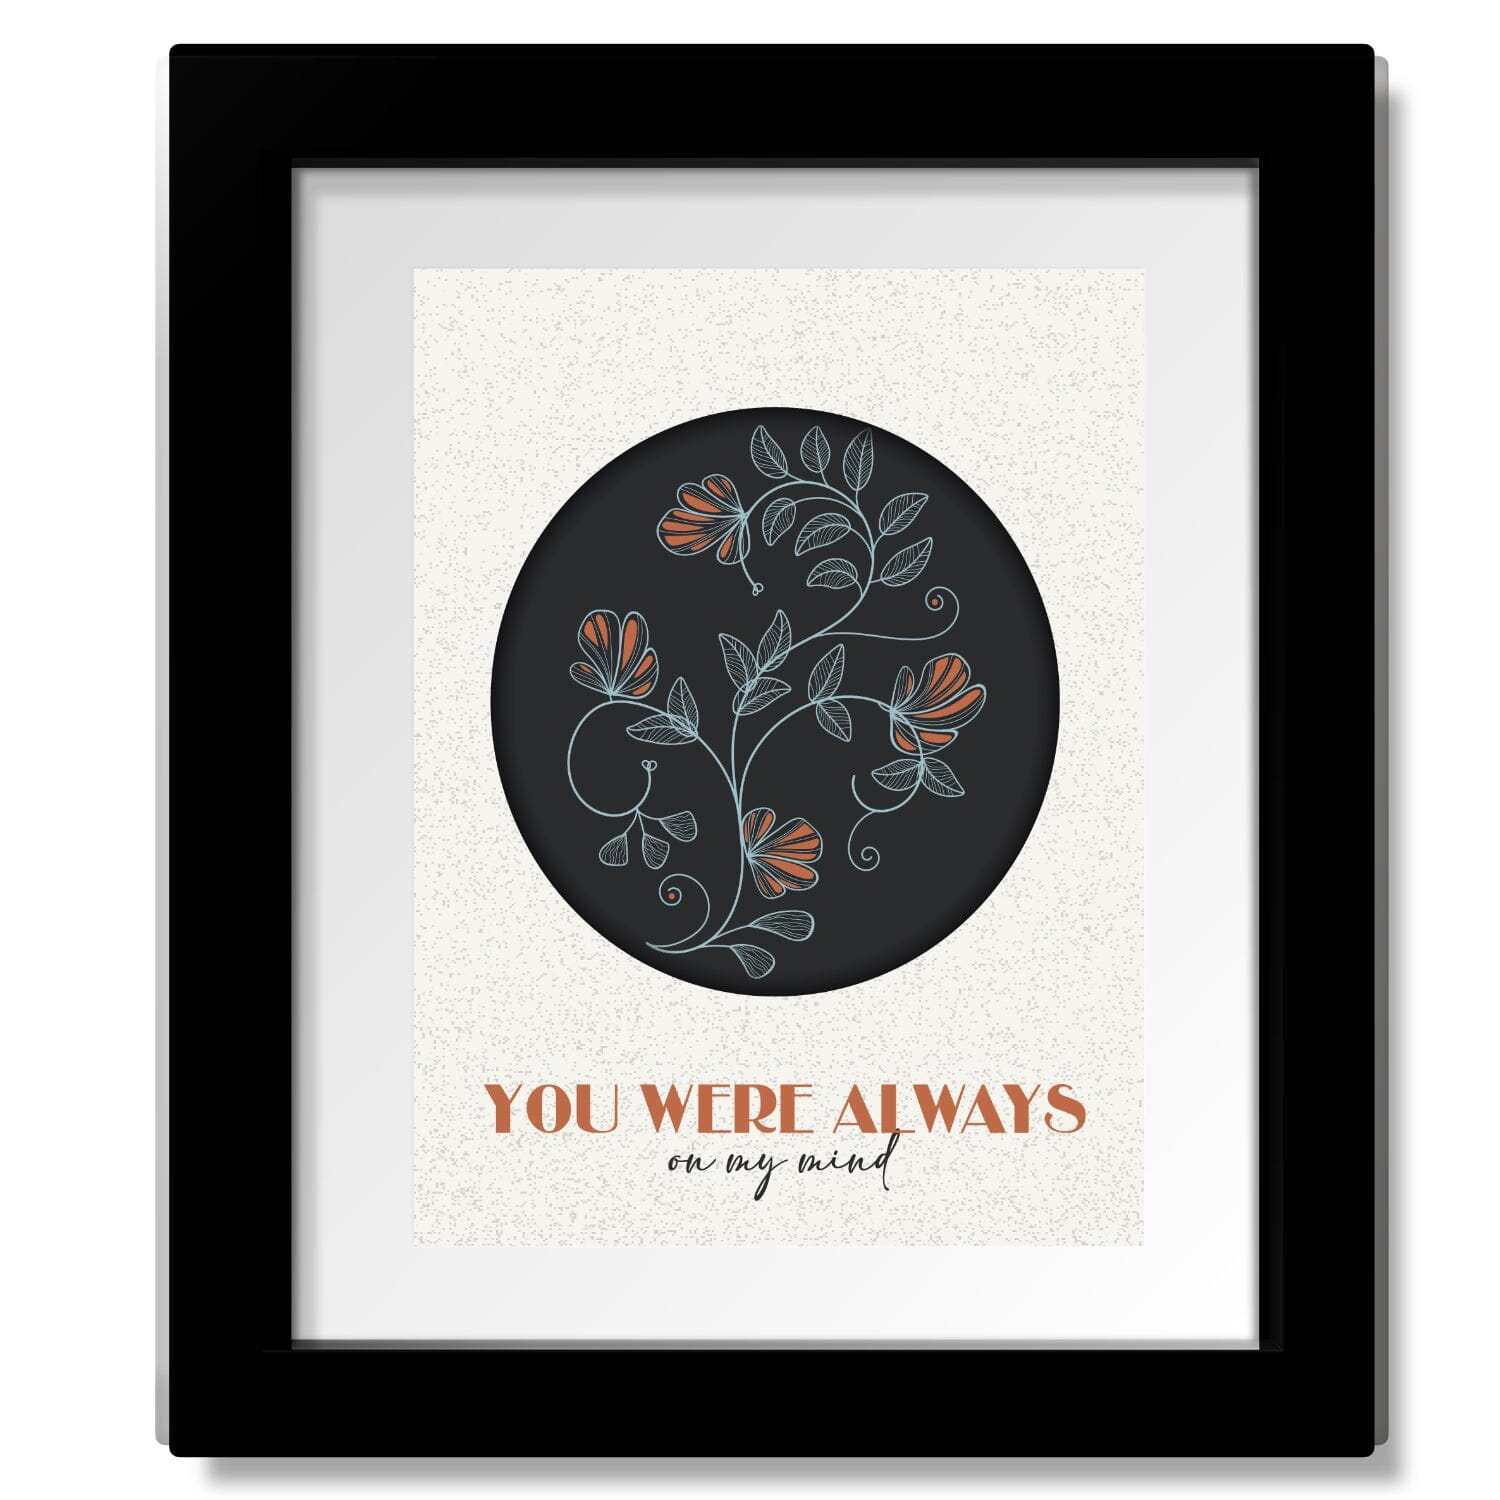 You Were Always on my Mind by Willie Nelson - Song Lyric Art Song Lyrics Art Song Lyrics Art 8x10 Matted and Framed Print 